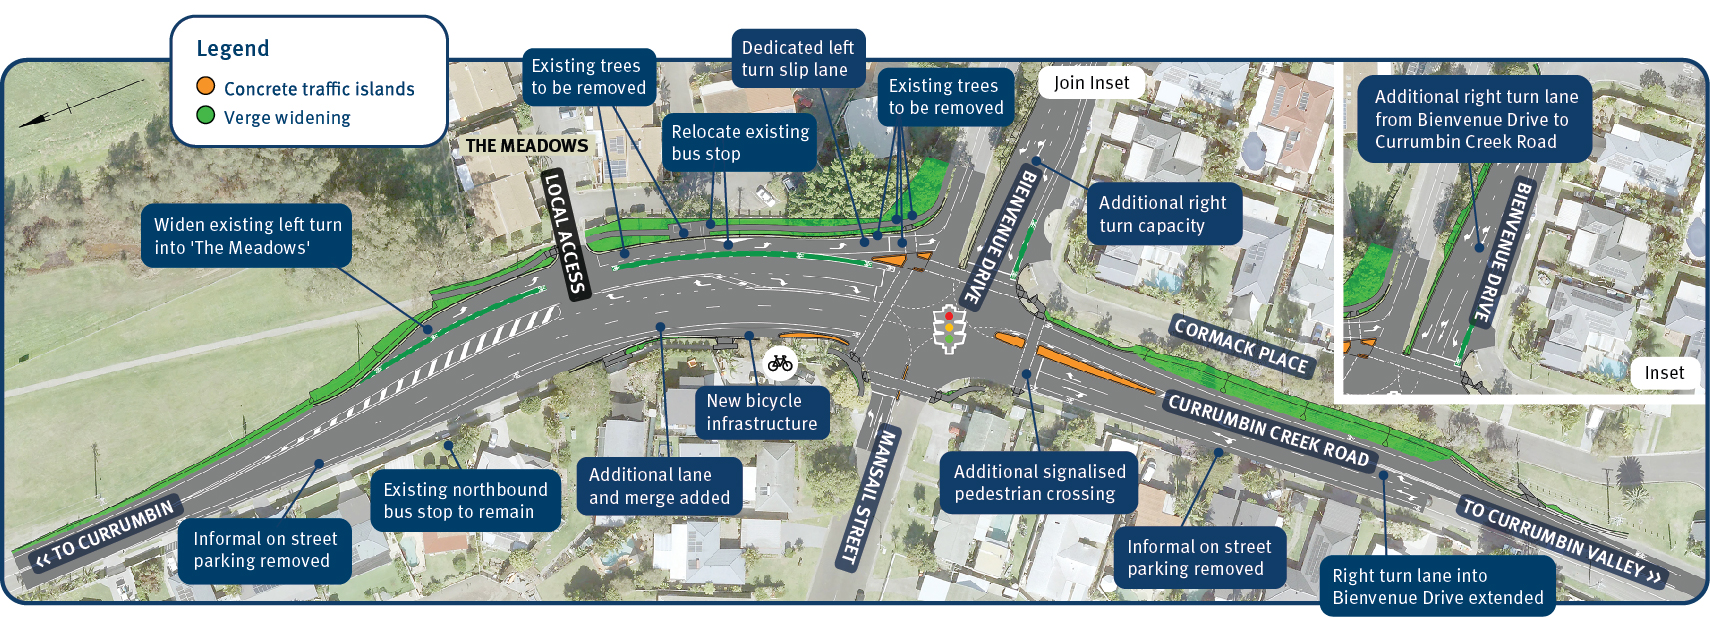 Design concept that shows an overview of the upgrades to the Currumbin Creek Road and Bienvenue Drive intersection.